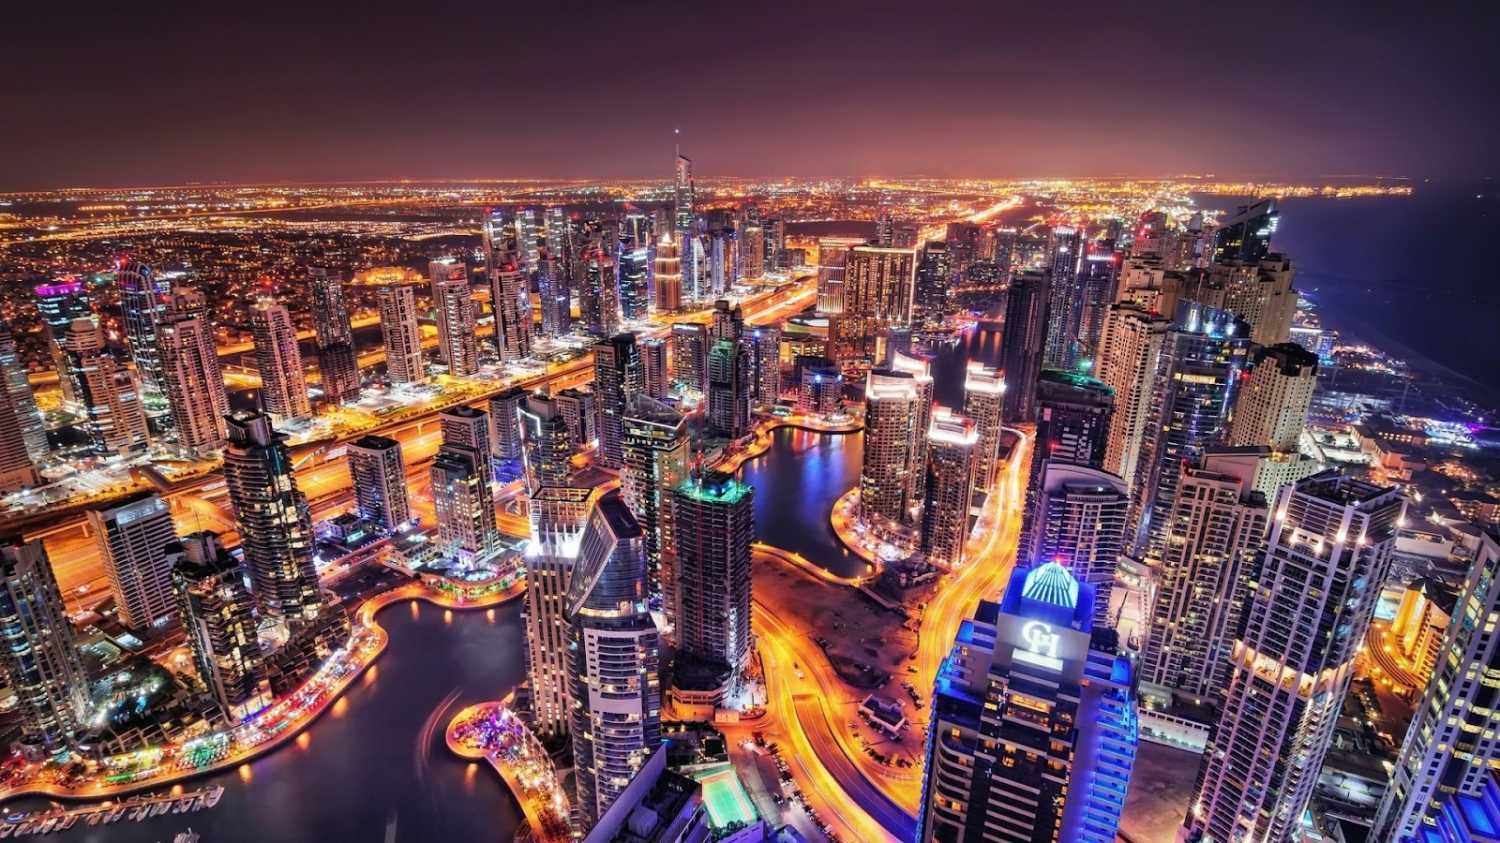 How to get to Dubai Marina and what to see there?